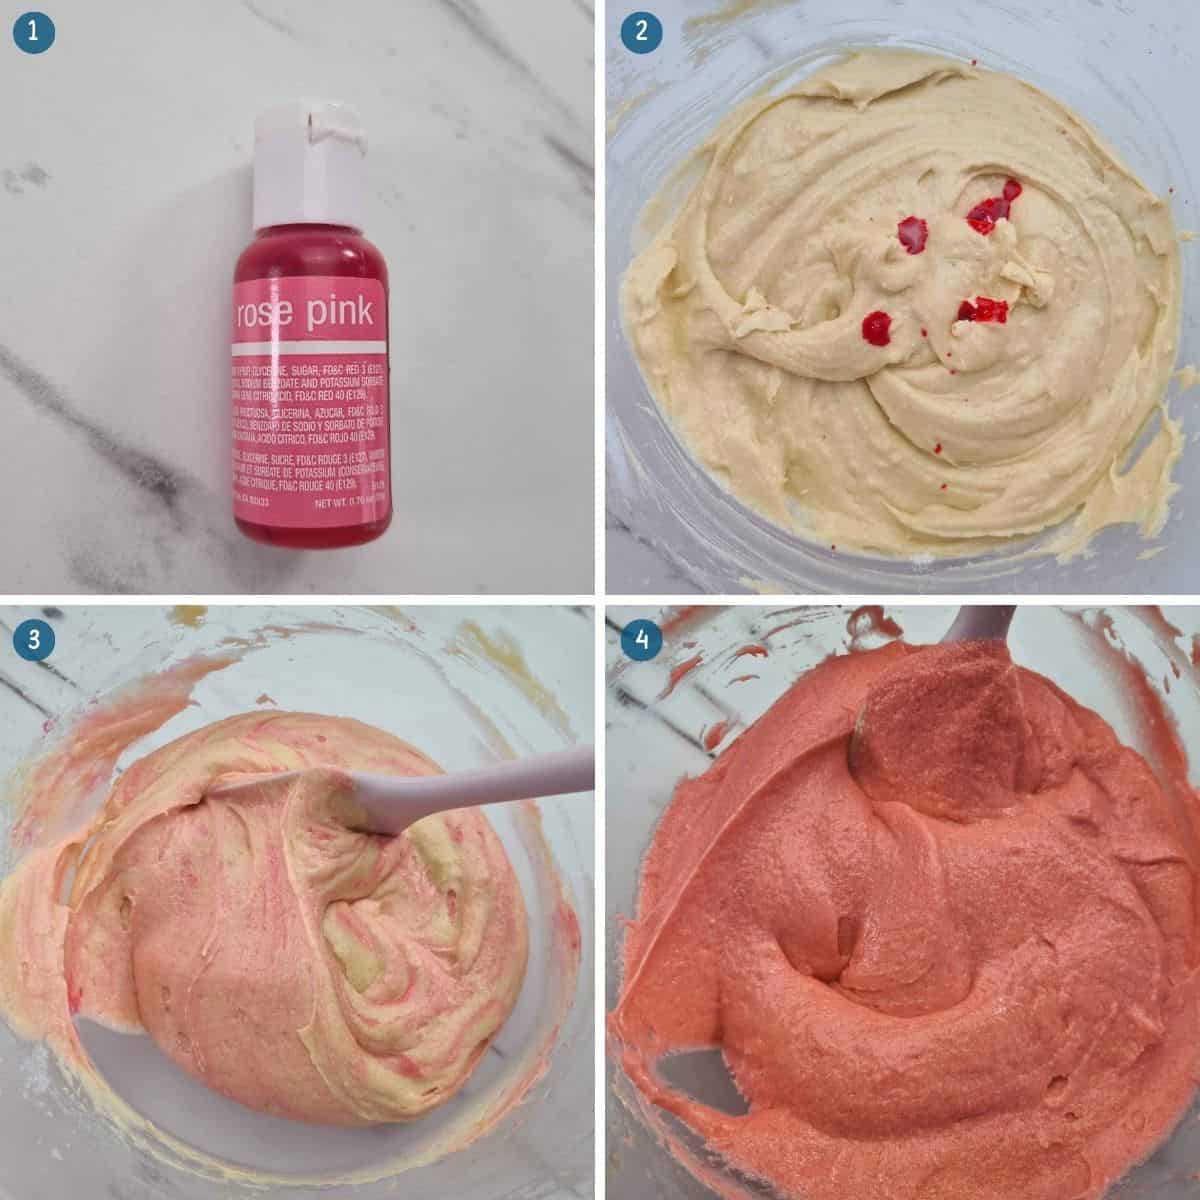 adding-the-pink-food-colouring-to-the-rose-wine-cupcakes-mixture